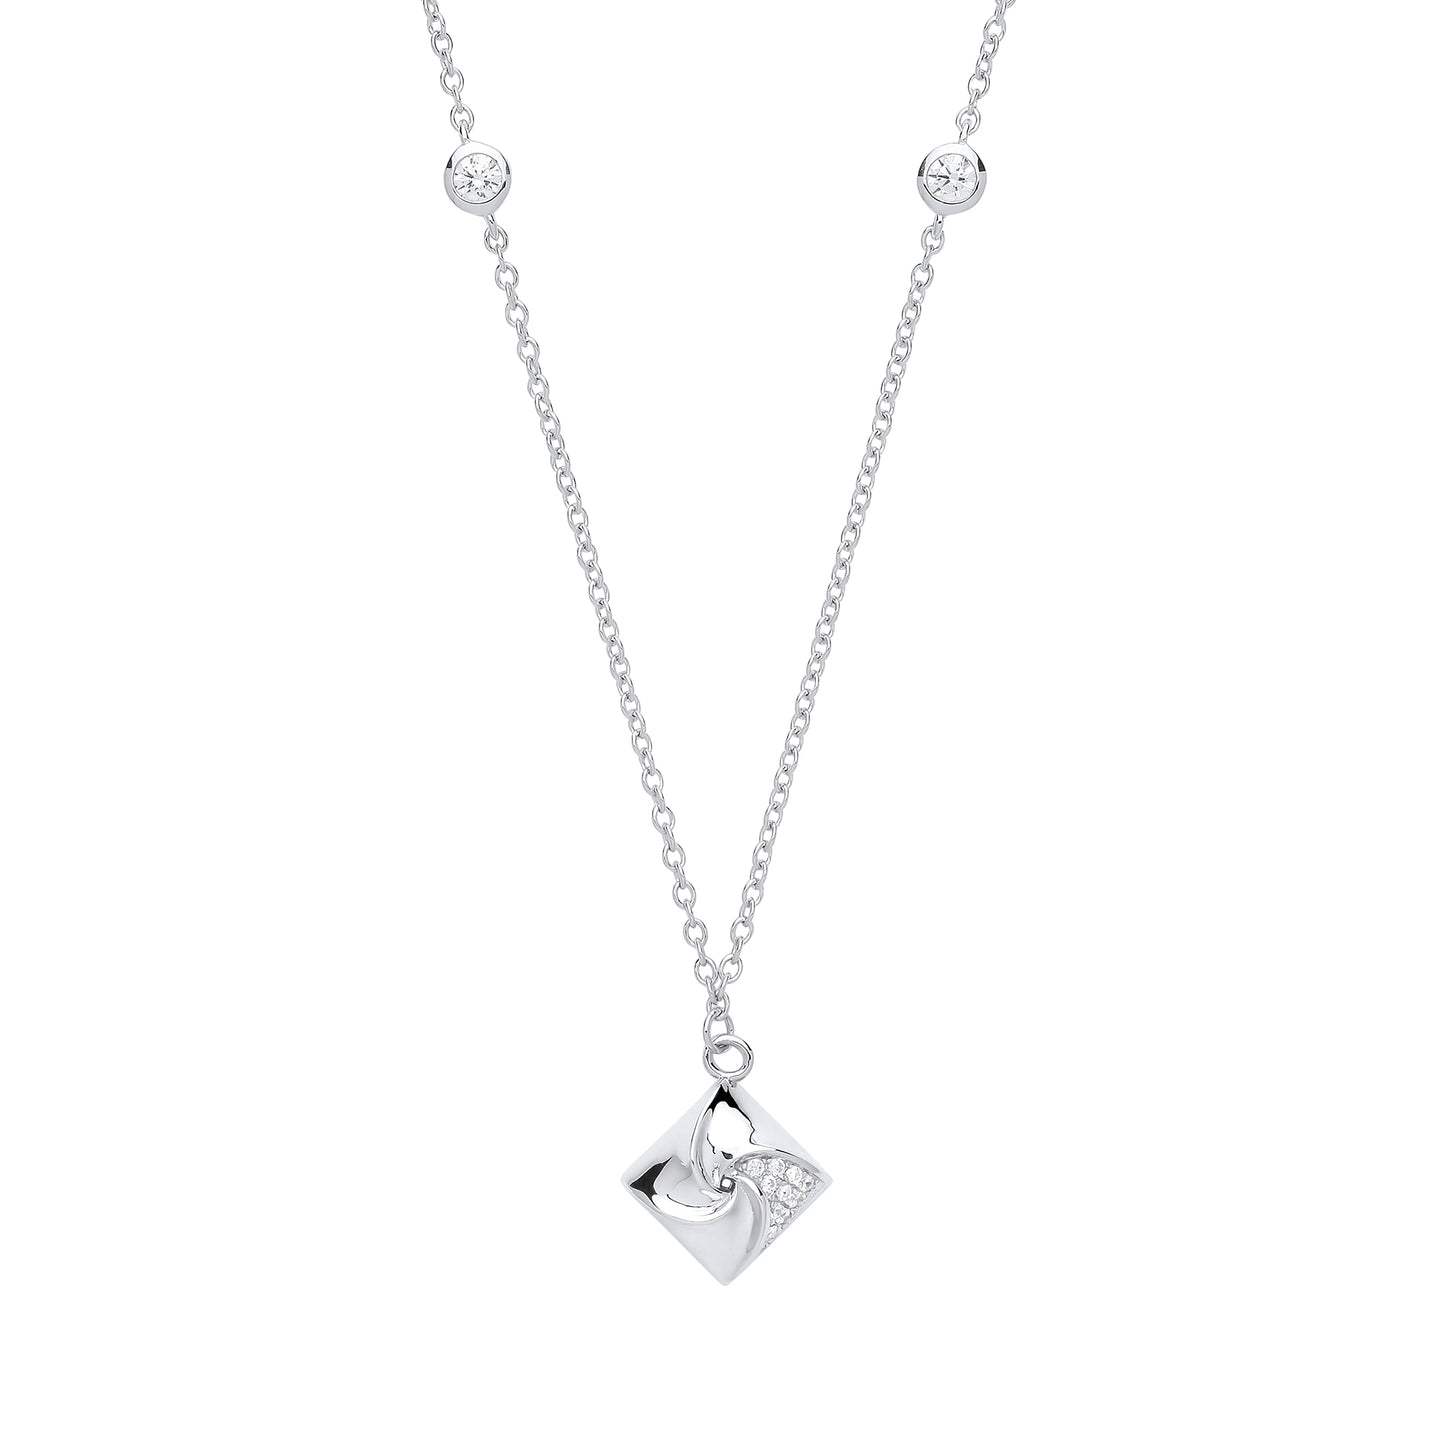 Silver  CZ Swirling Square Charm Necklace 18 inch - GVK254